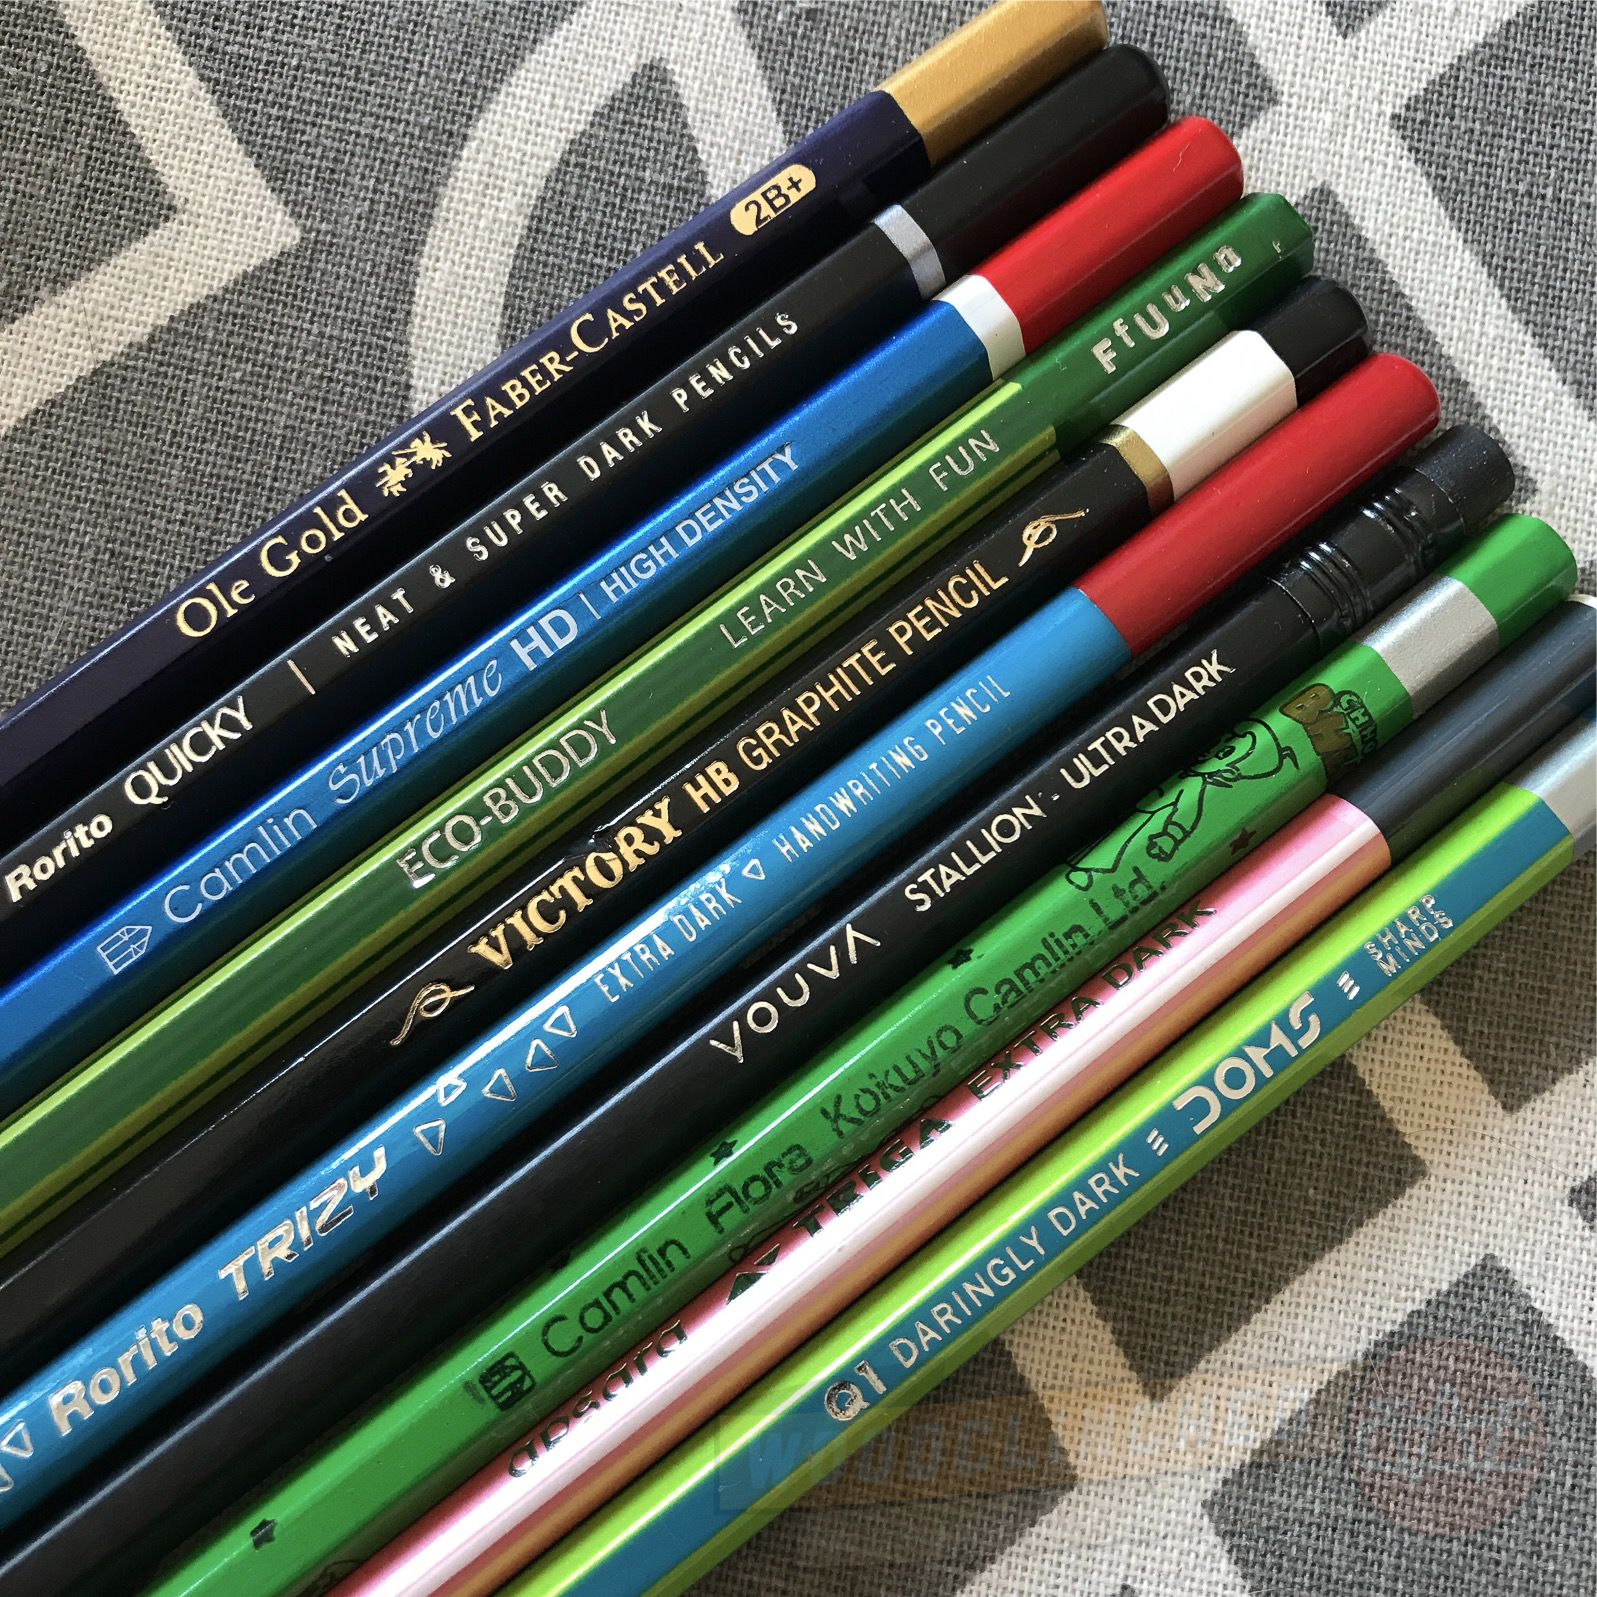 The colors, the designs, the typography, and the words on these assorted Indian pencils are unique and just so delightful to me.